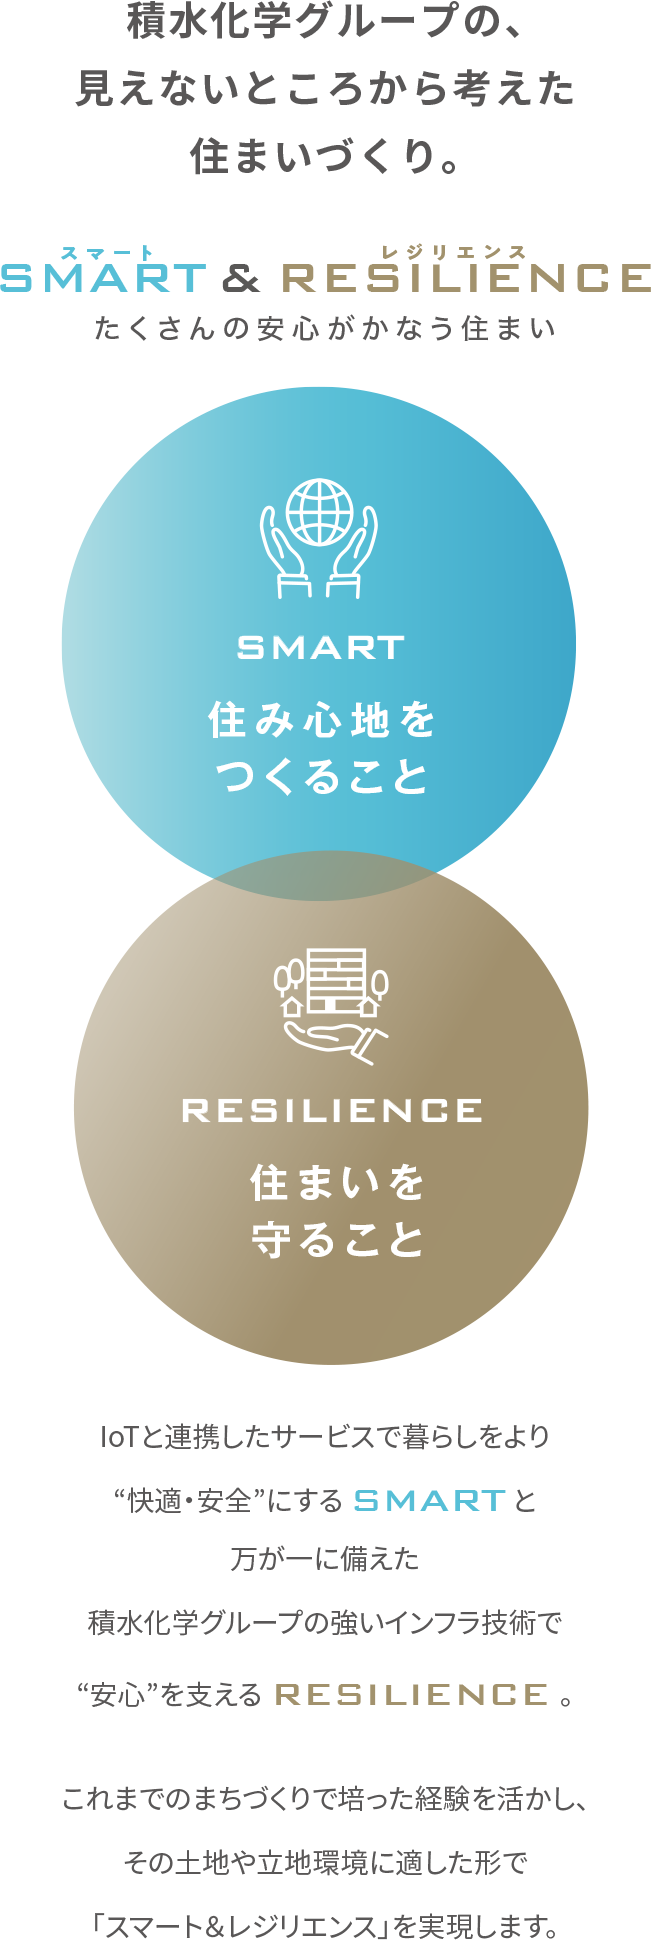 SMART&RESILIENCE